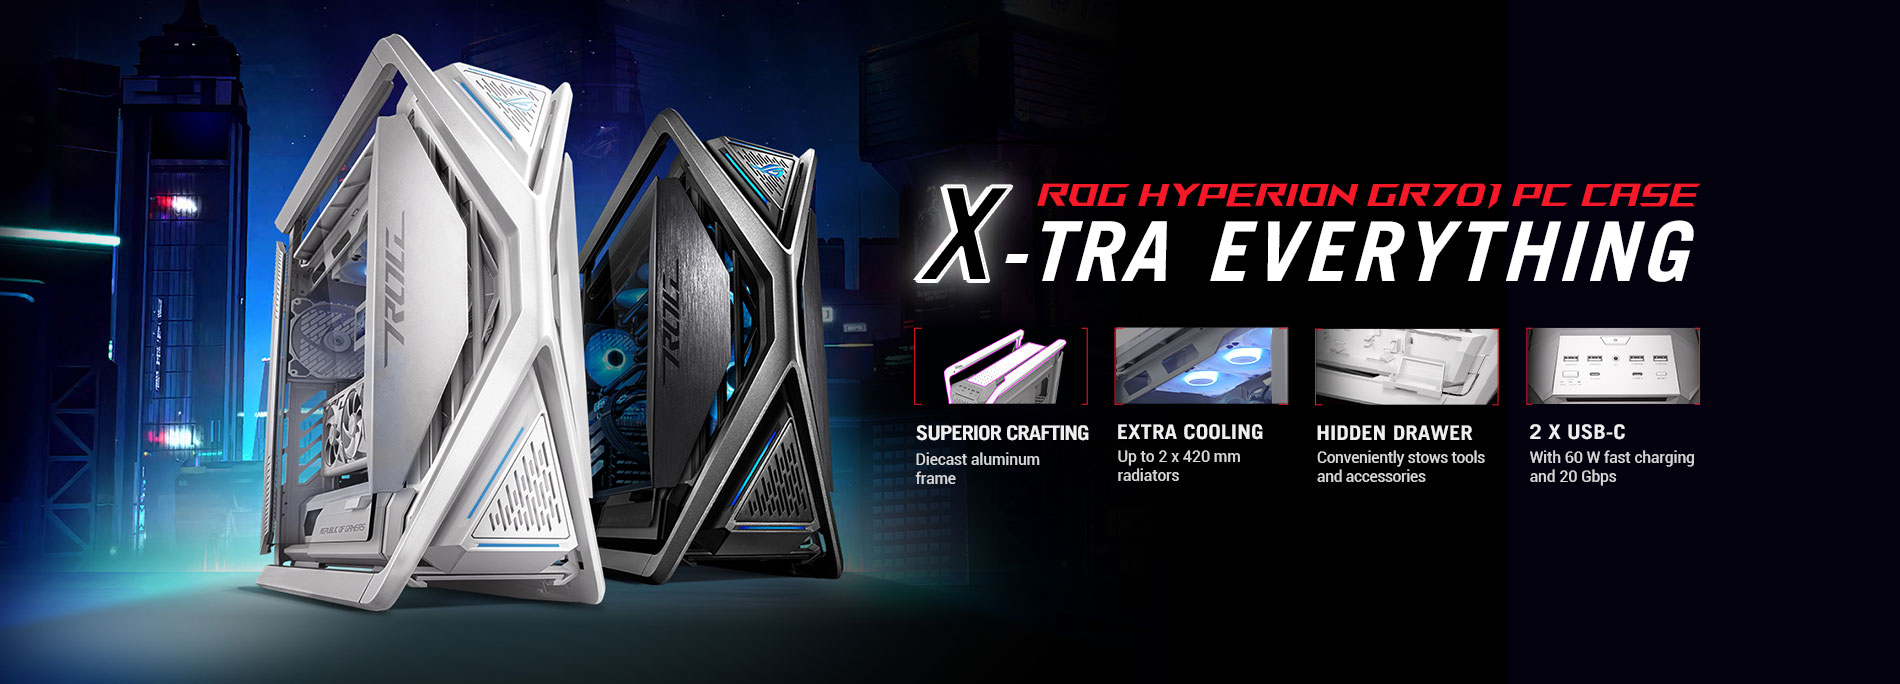 ROG Hyperion - Where to Buy